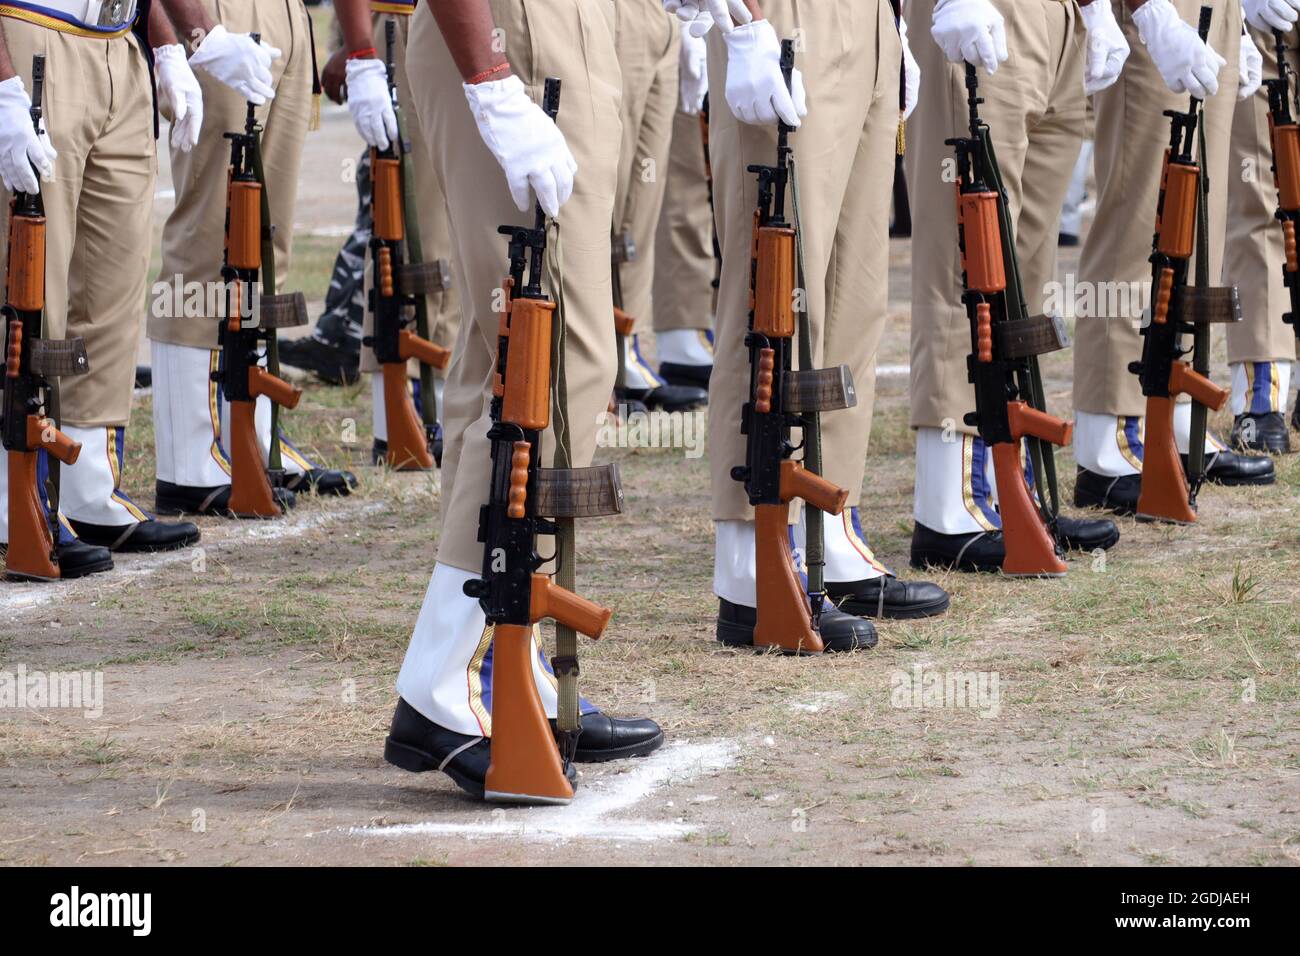 Guwahati, India. 13th Aug, 2021. Indian Paramilitary soldiers takes part in full dress rehearsal for the 75th Independence Day parade in Guwahati, India on August 13, 2021. Credit: David Talukdar/Alamy Live News Stock Photo